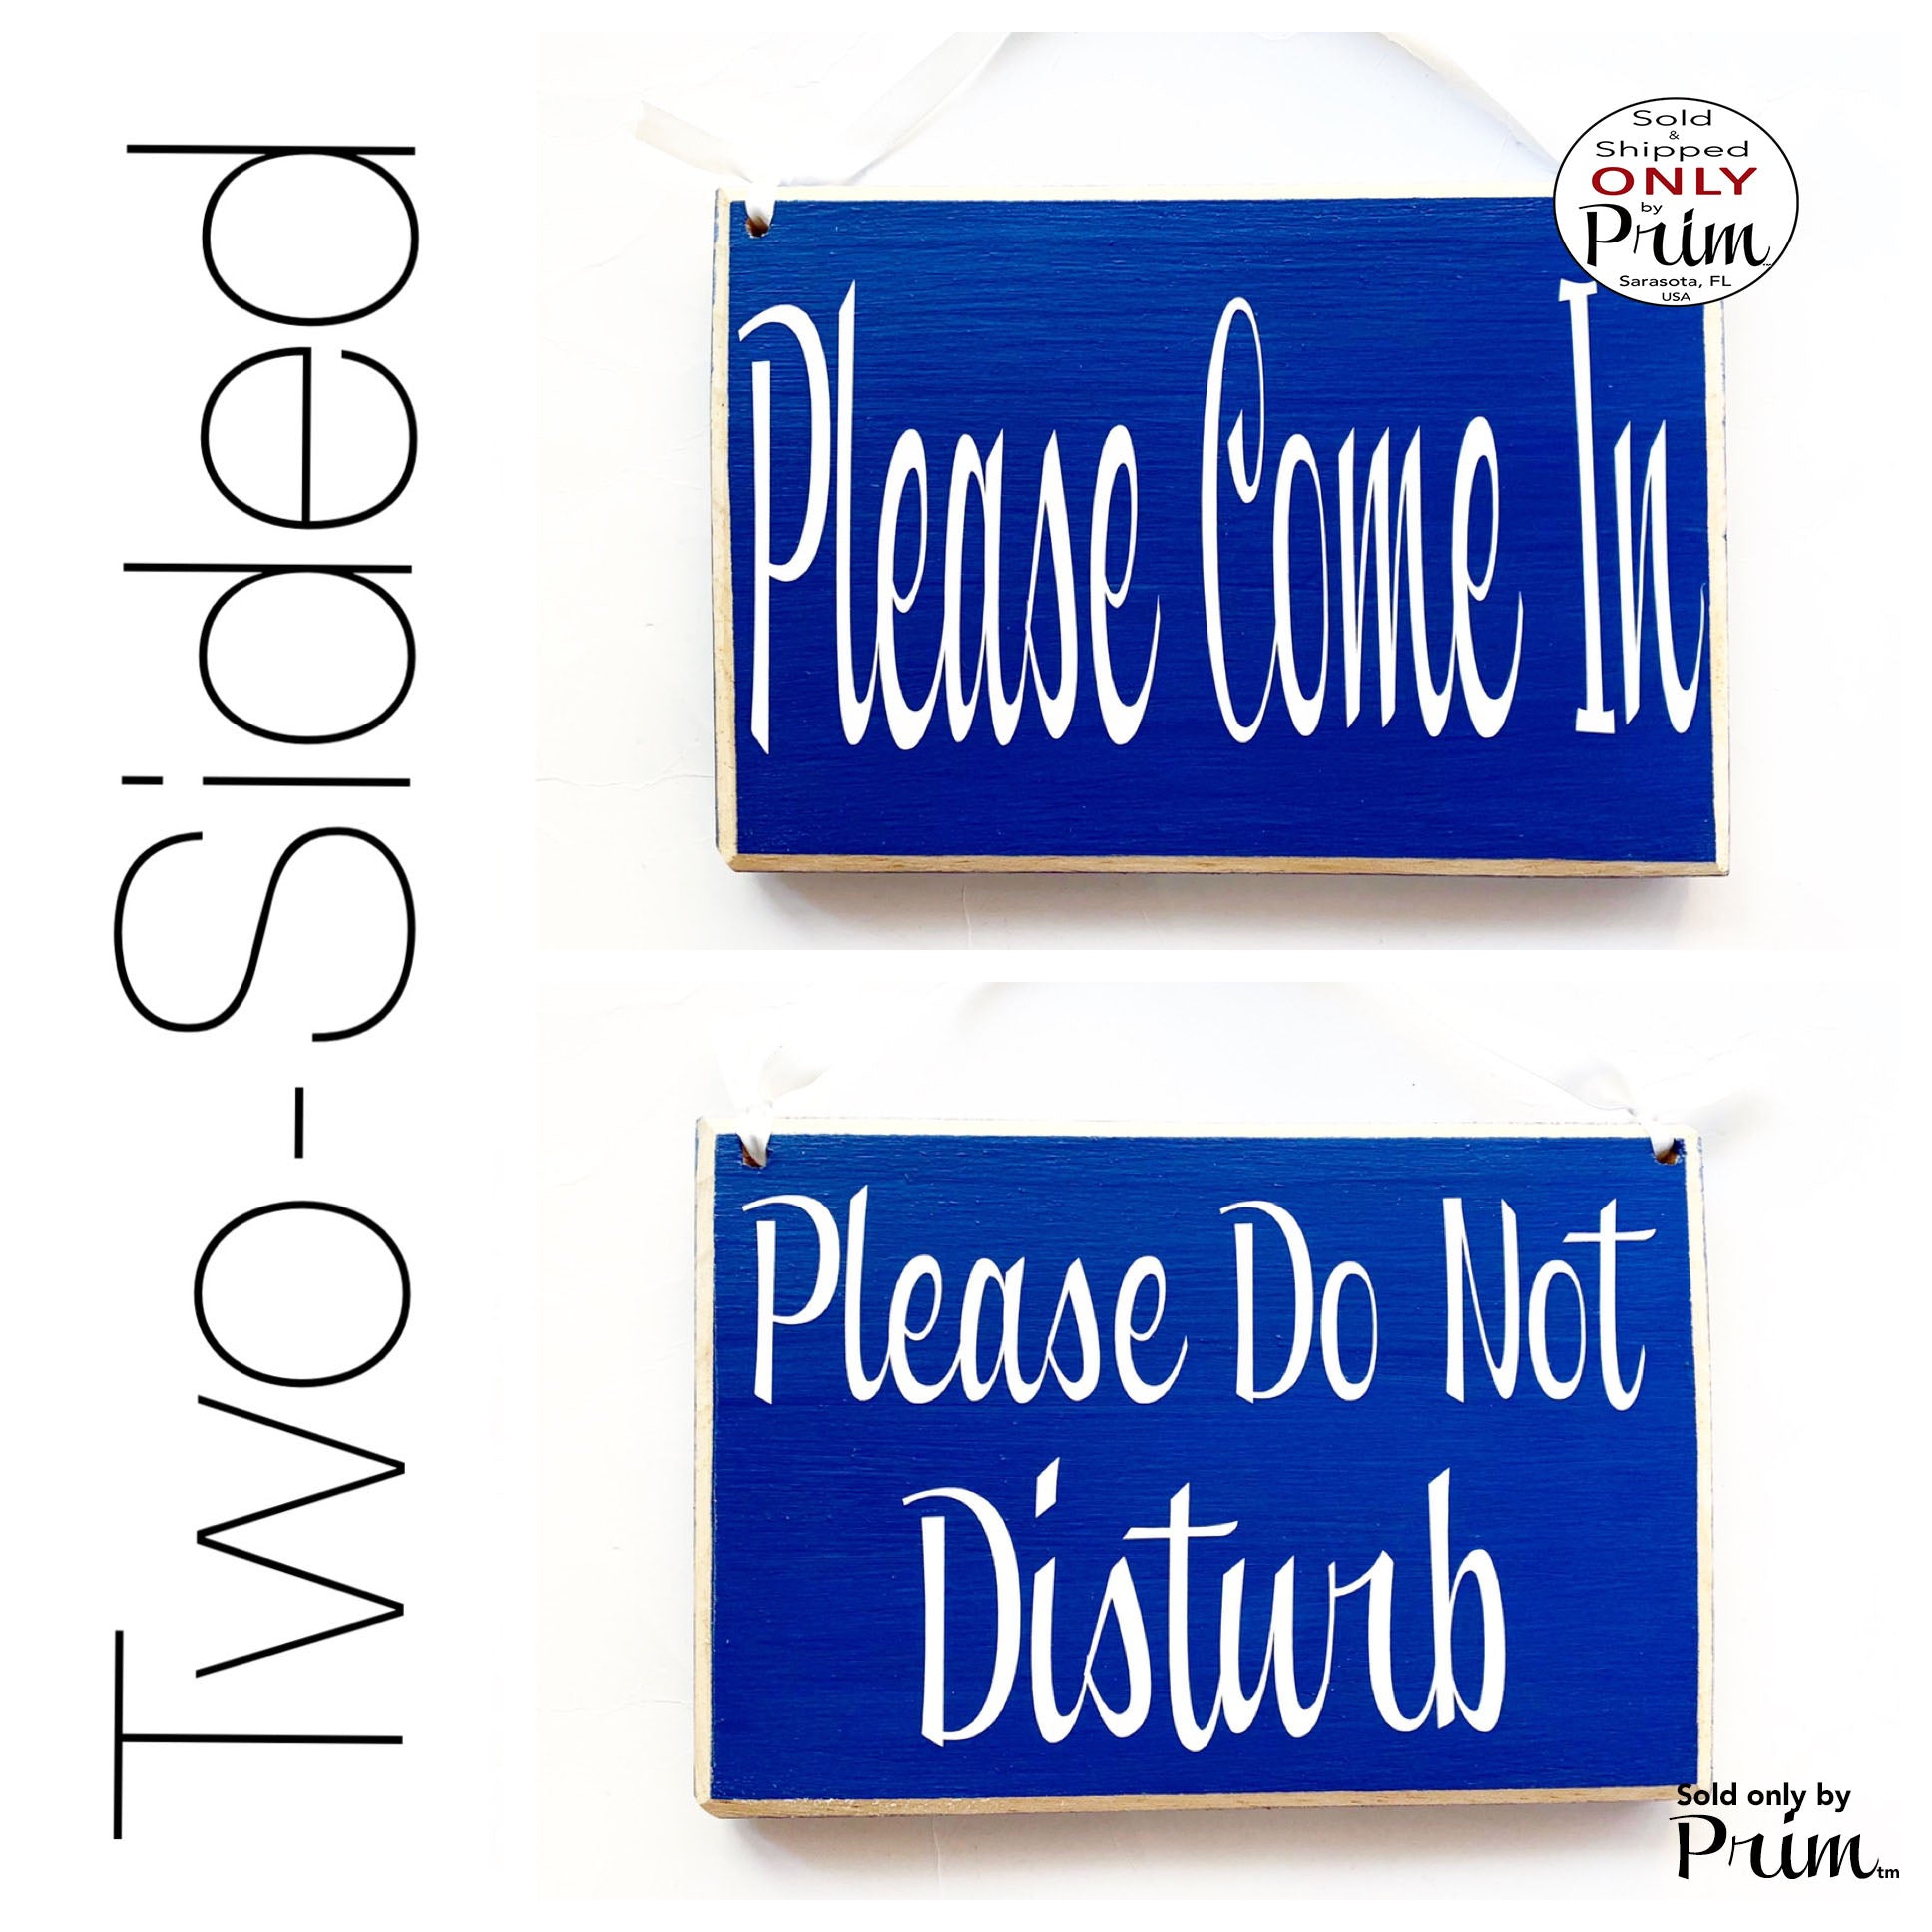 8x6 Please Come In Please Do Not Disturb Custom Wood Sign | Welcome Busy In Session Office In Progress Shhh Do Not Enter Open Door Plaque